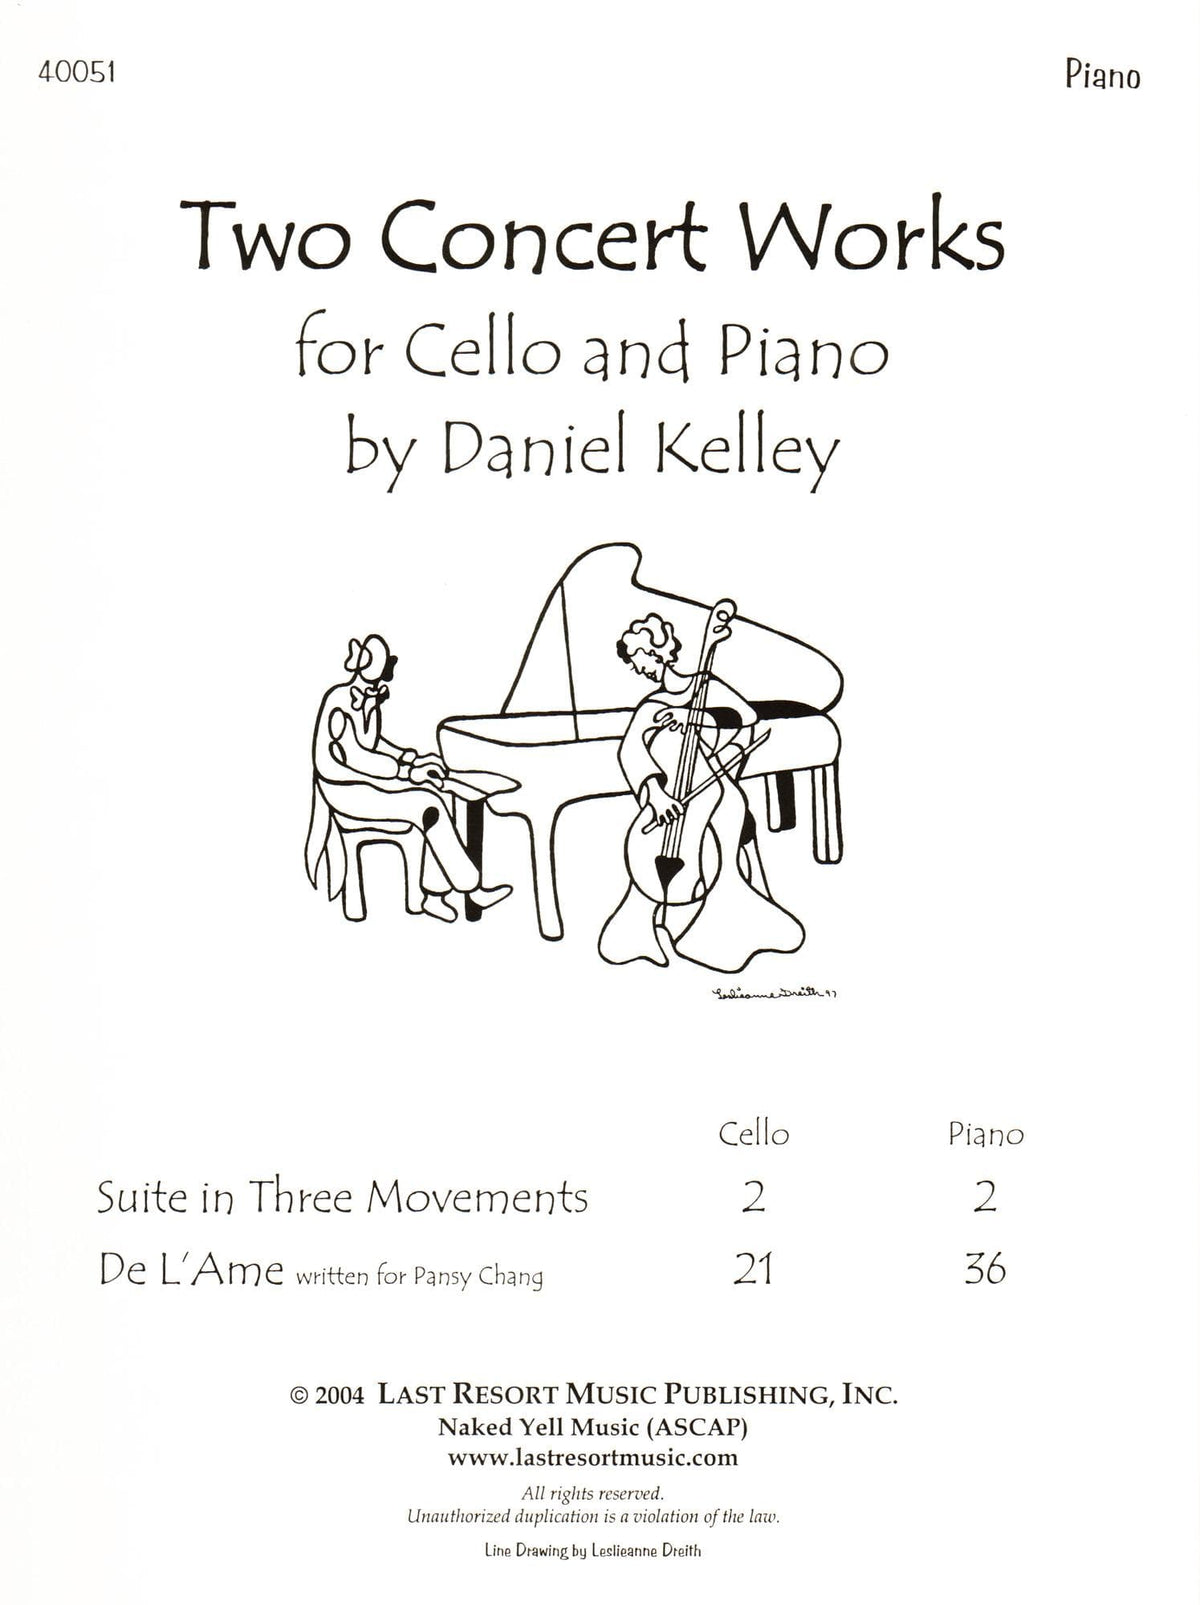 Kelley, Daniel - Two Concert Works - Cello and Piano - Last Resort Music